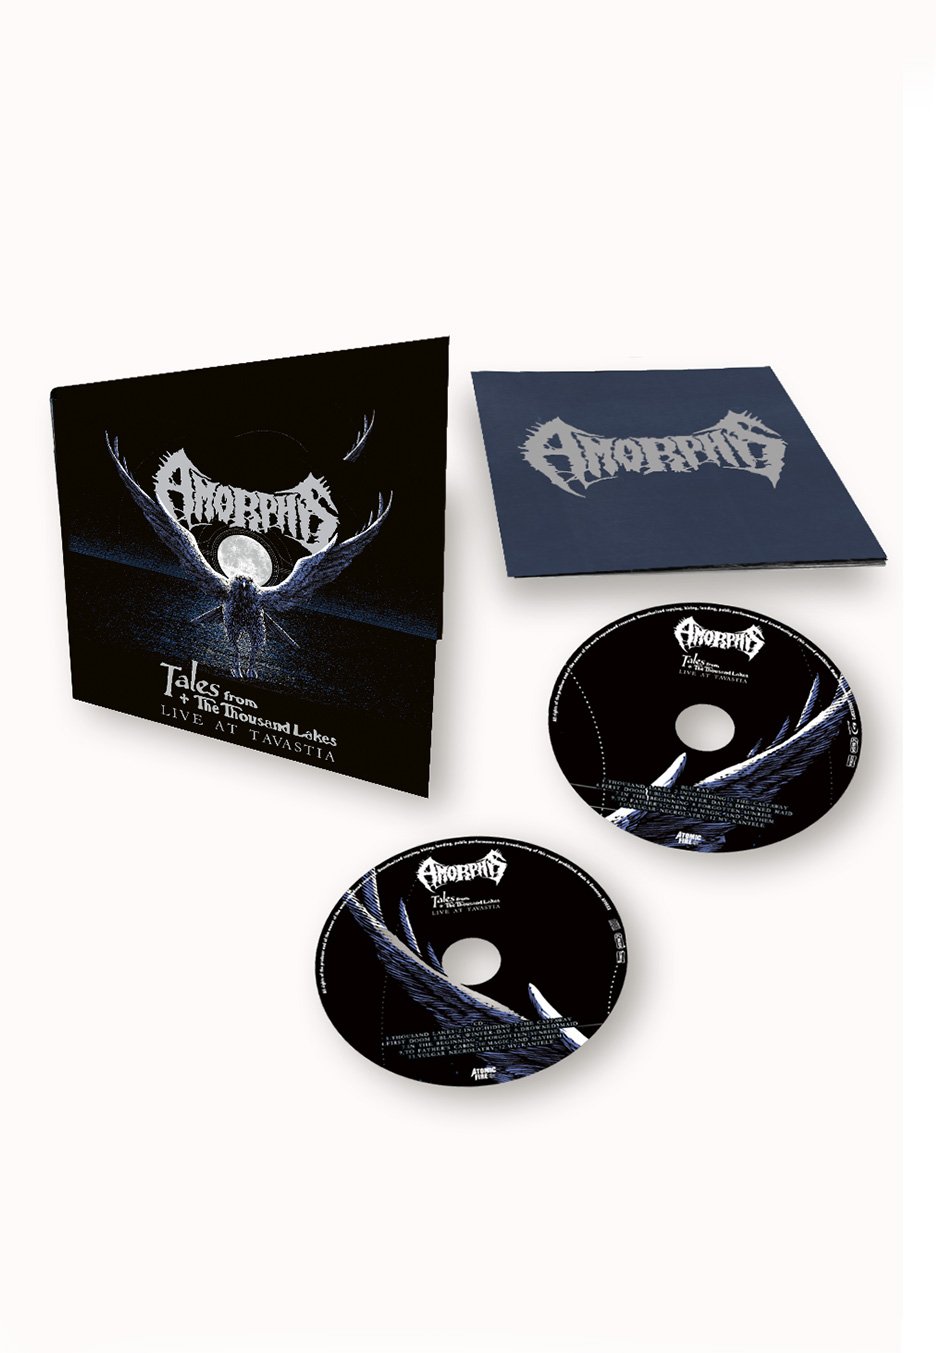 Amorphis - Tales From The Thousand Lakes (Live At Tavastia) Ltd. Edition - Digipak-CD + Blu Ray | Neutral-Image